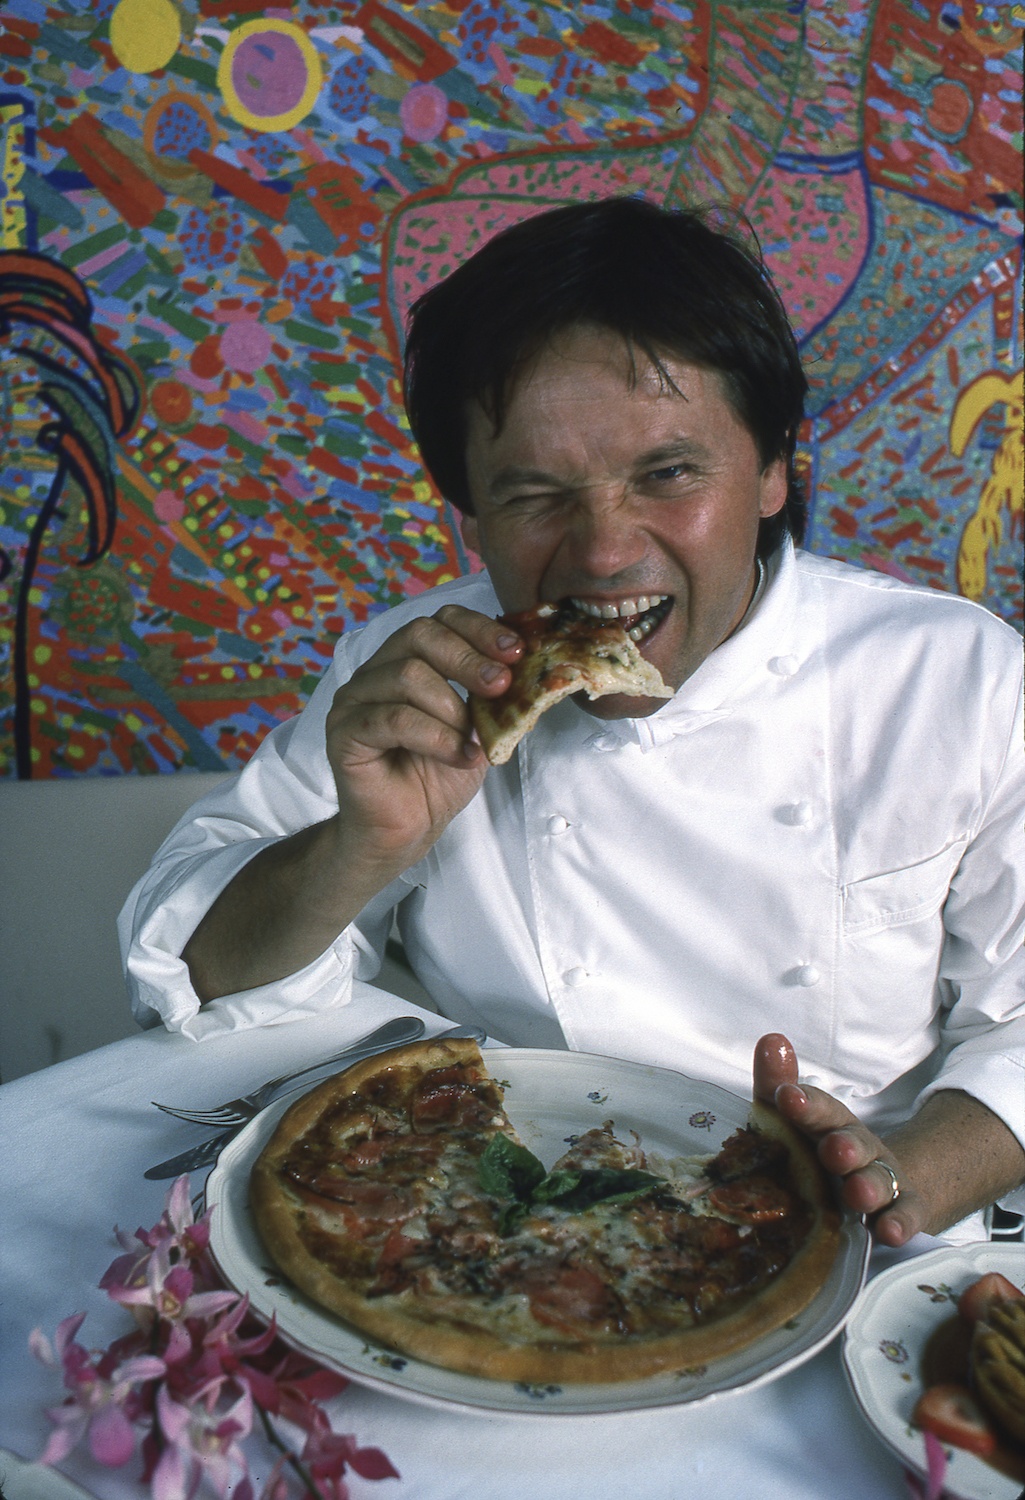 Wolfgang Puck, who opened Spago in West Hollywood in 1982, was a first-wave celebrity chef. Almost 40 years later, his empire circles the globe, including fine dining restaurants, a catering operation, casual and fast-food chains, and other related products.